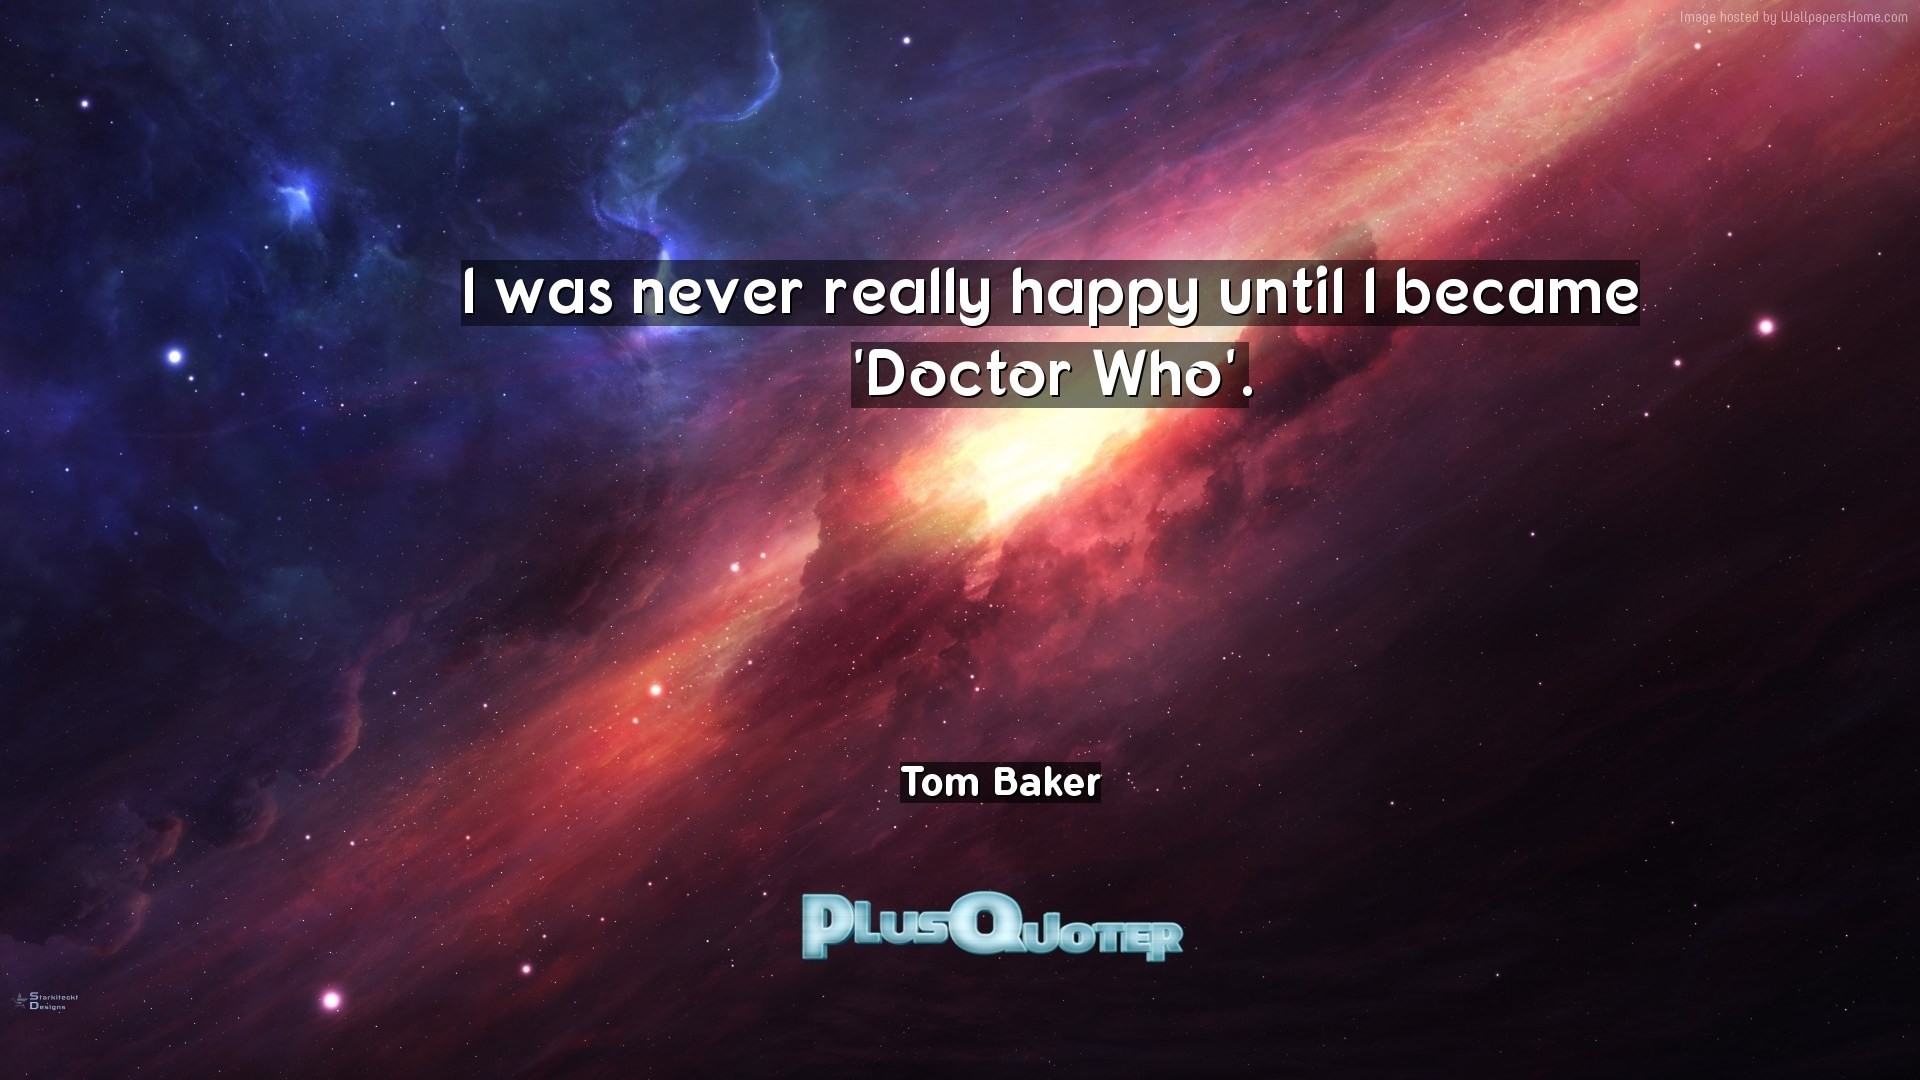 1920x1080 Download Wallpaper with inspirational Quotes- "I was never really happy  until I became